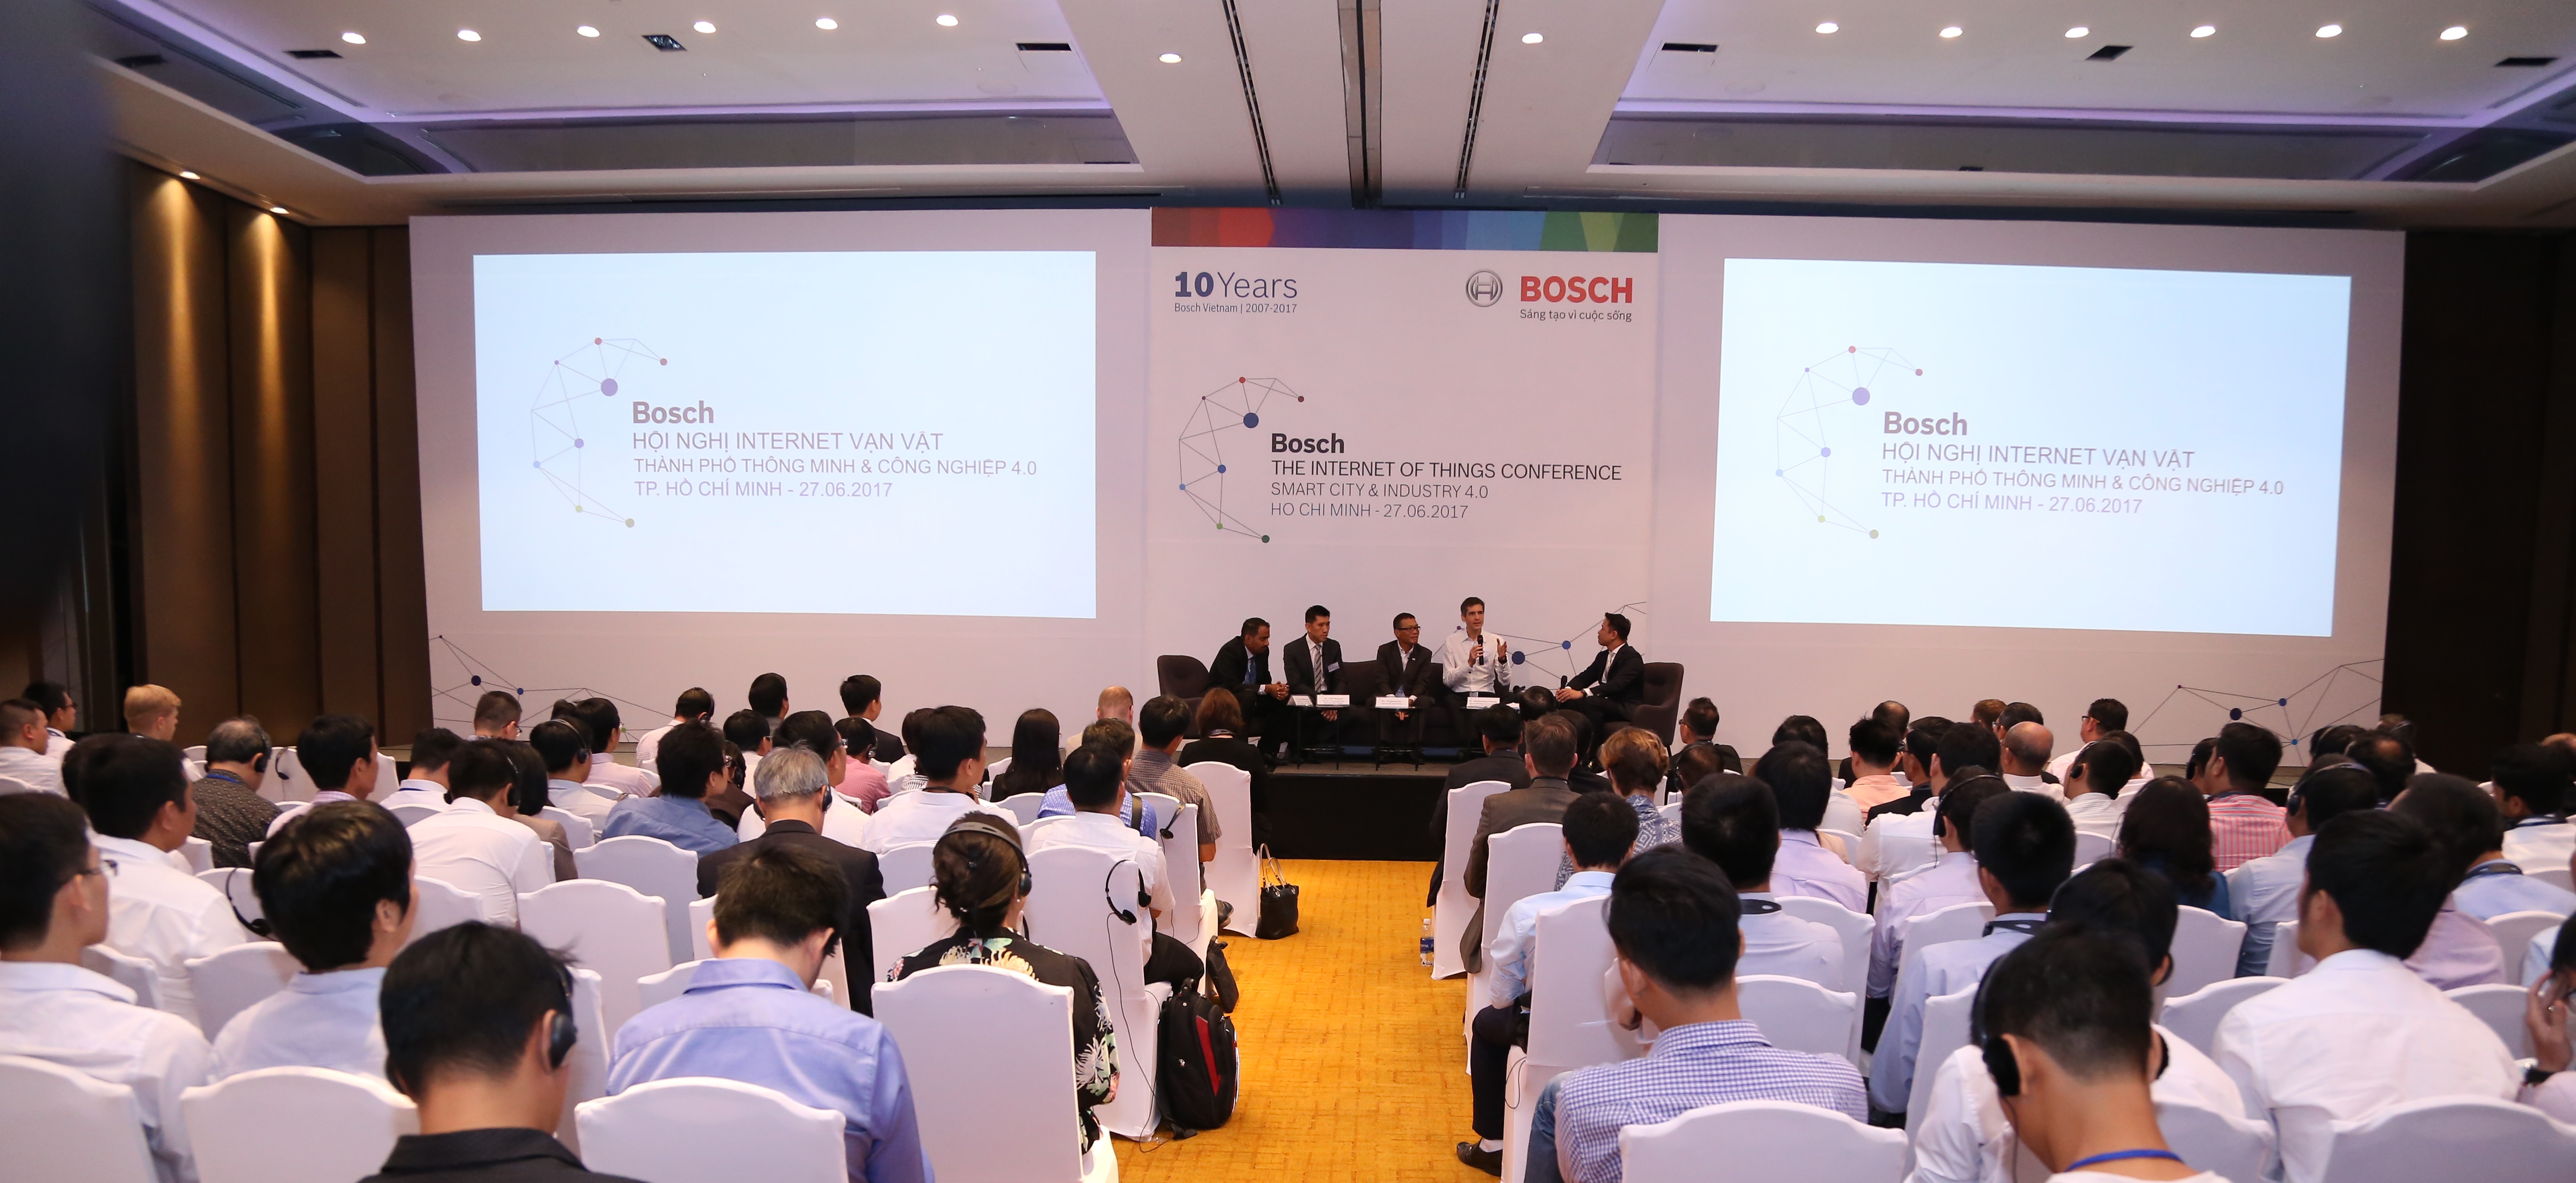 Bosch continues strong double-digit growth performance in Vietnam